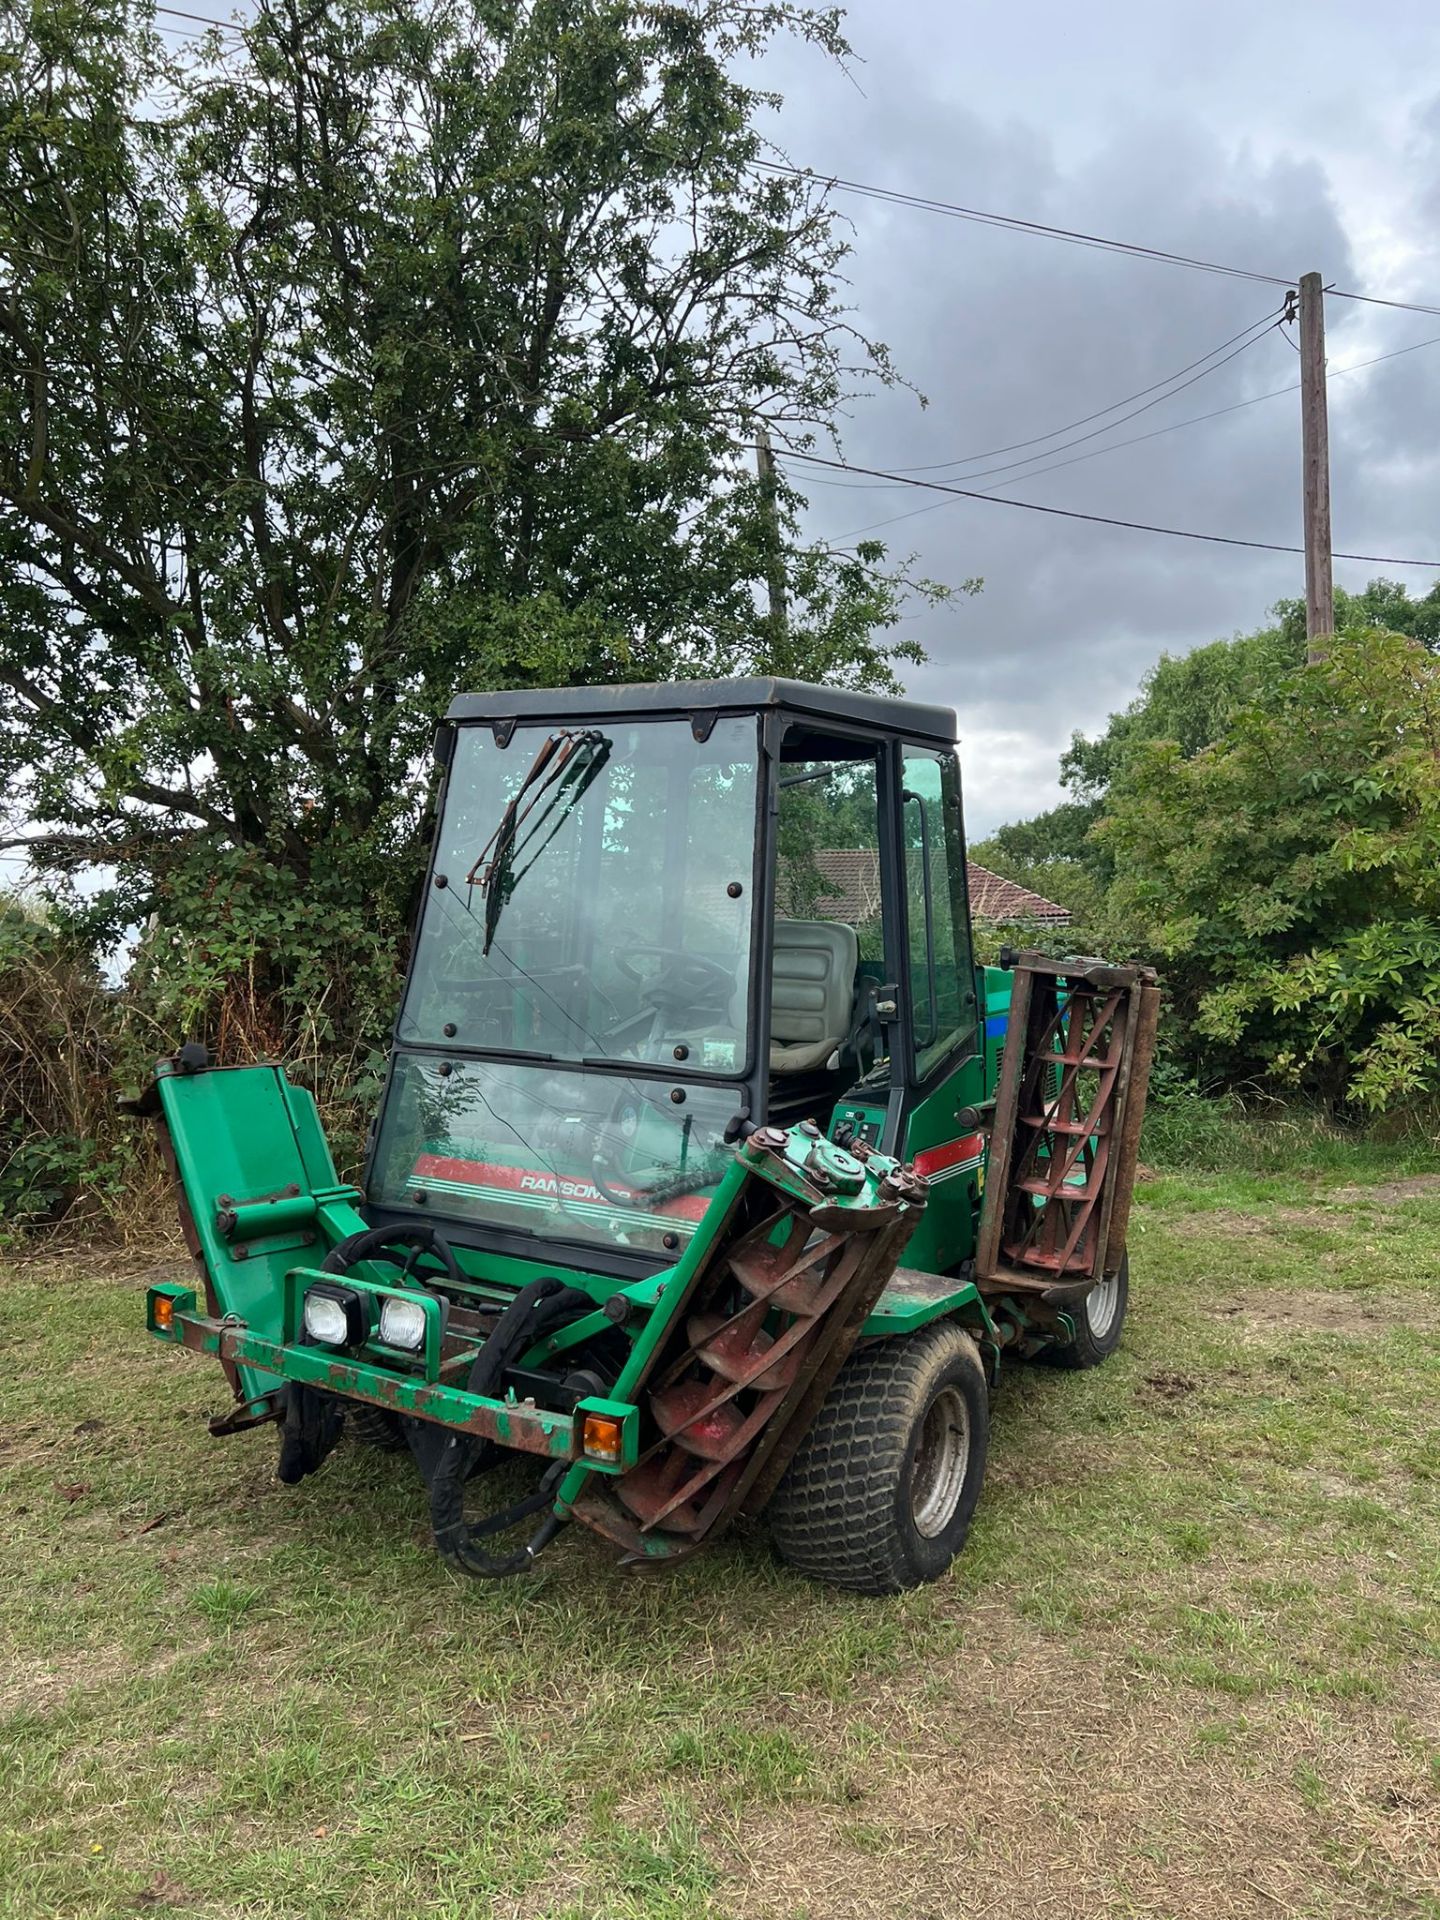 RANSOMES 3510 5 GANG RIDE ON LAWN MOWER *PLUS VAT*